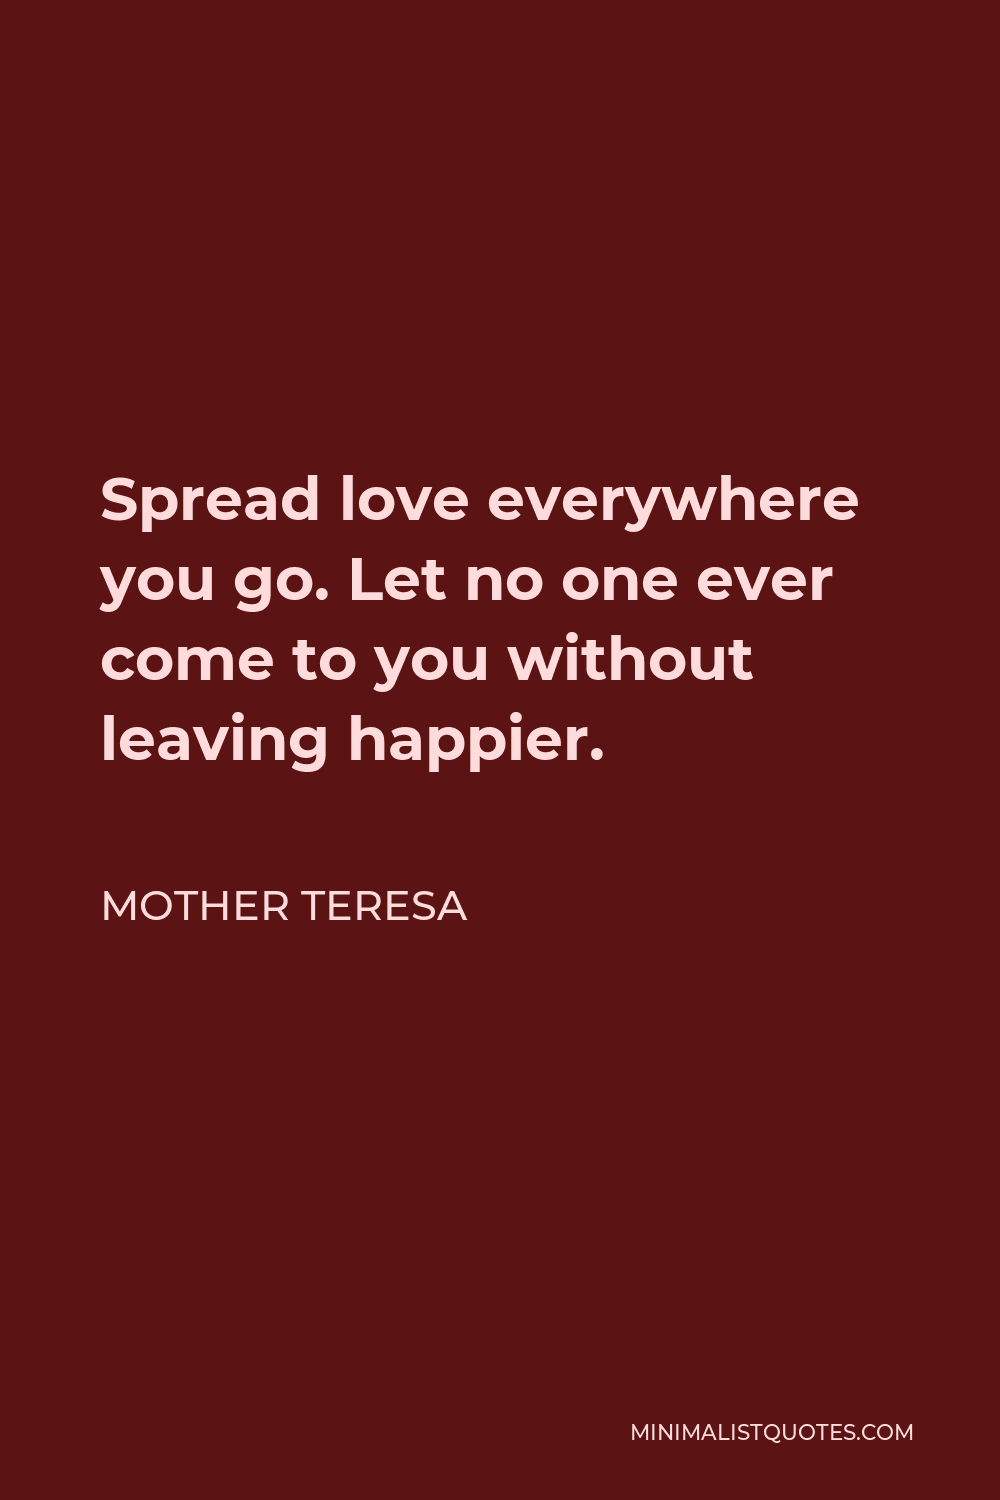 Mother Teresa spread Love Everywhere You Go. (Download Now) 